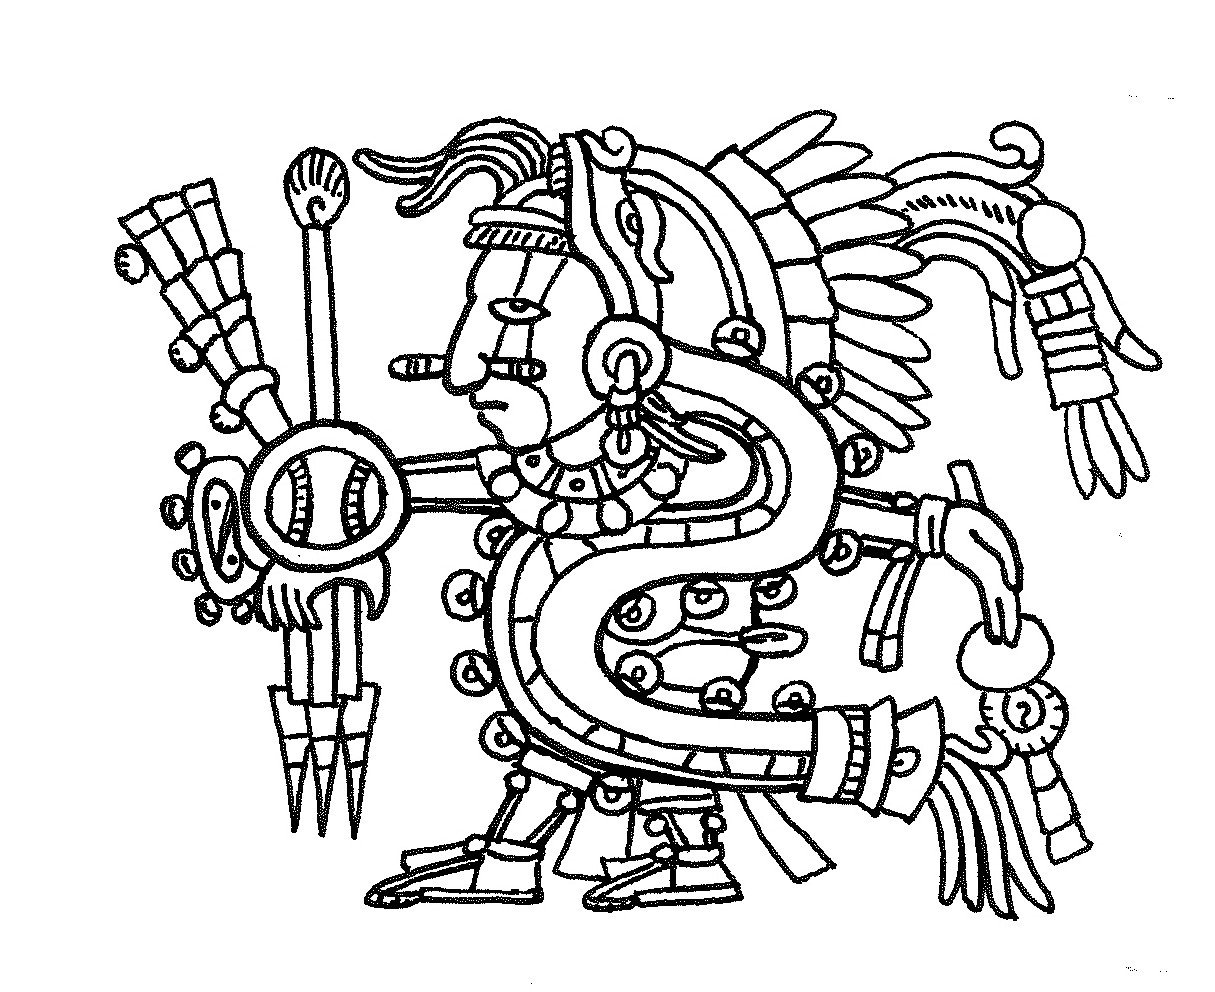 Diagram showing glyph with figure in headdress.